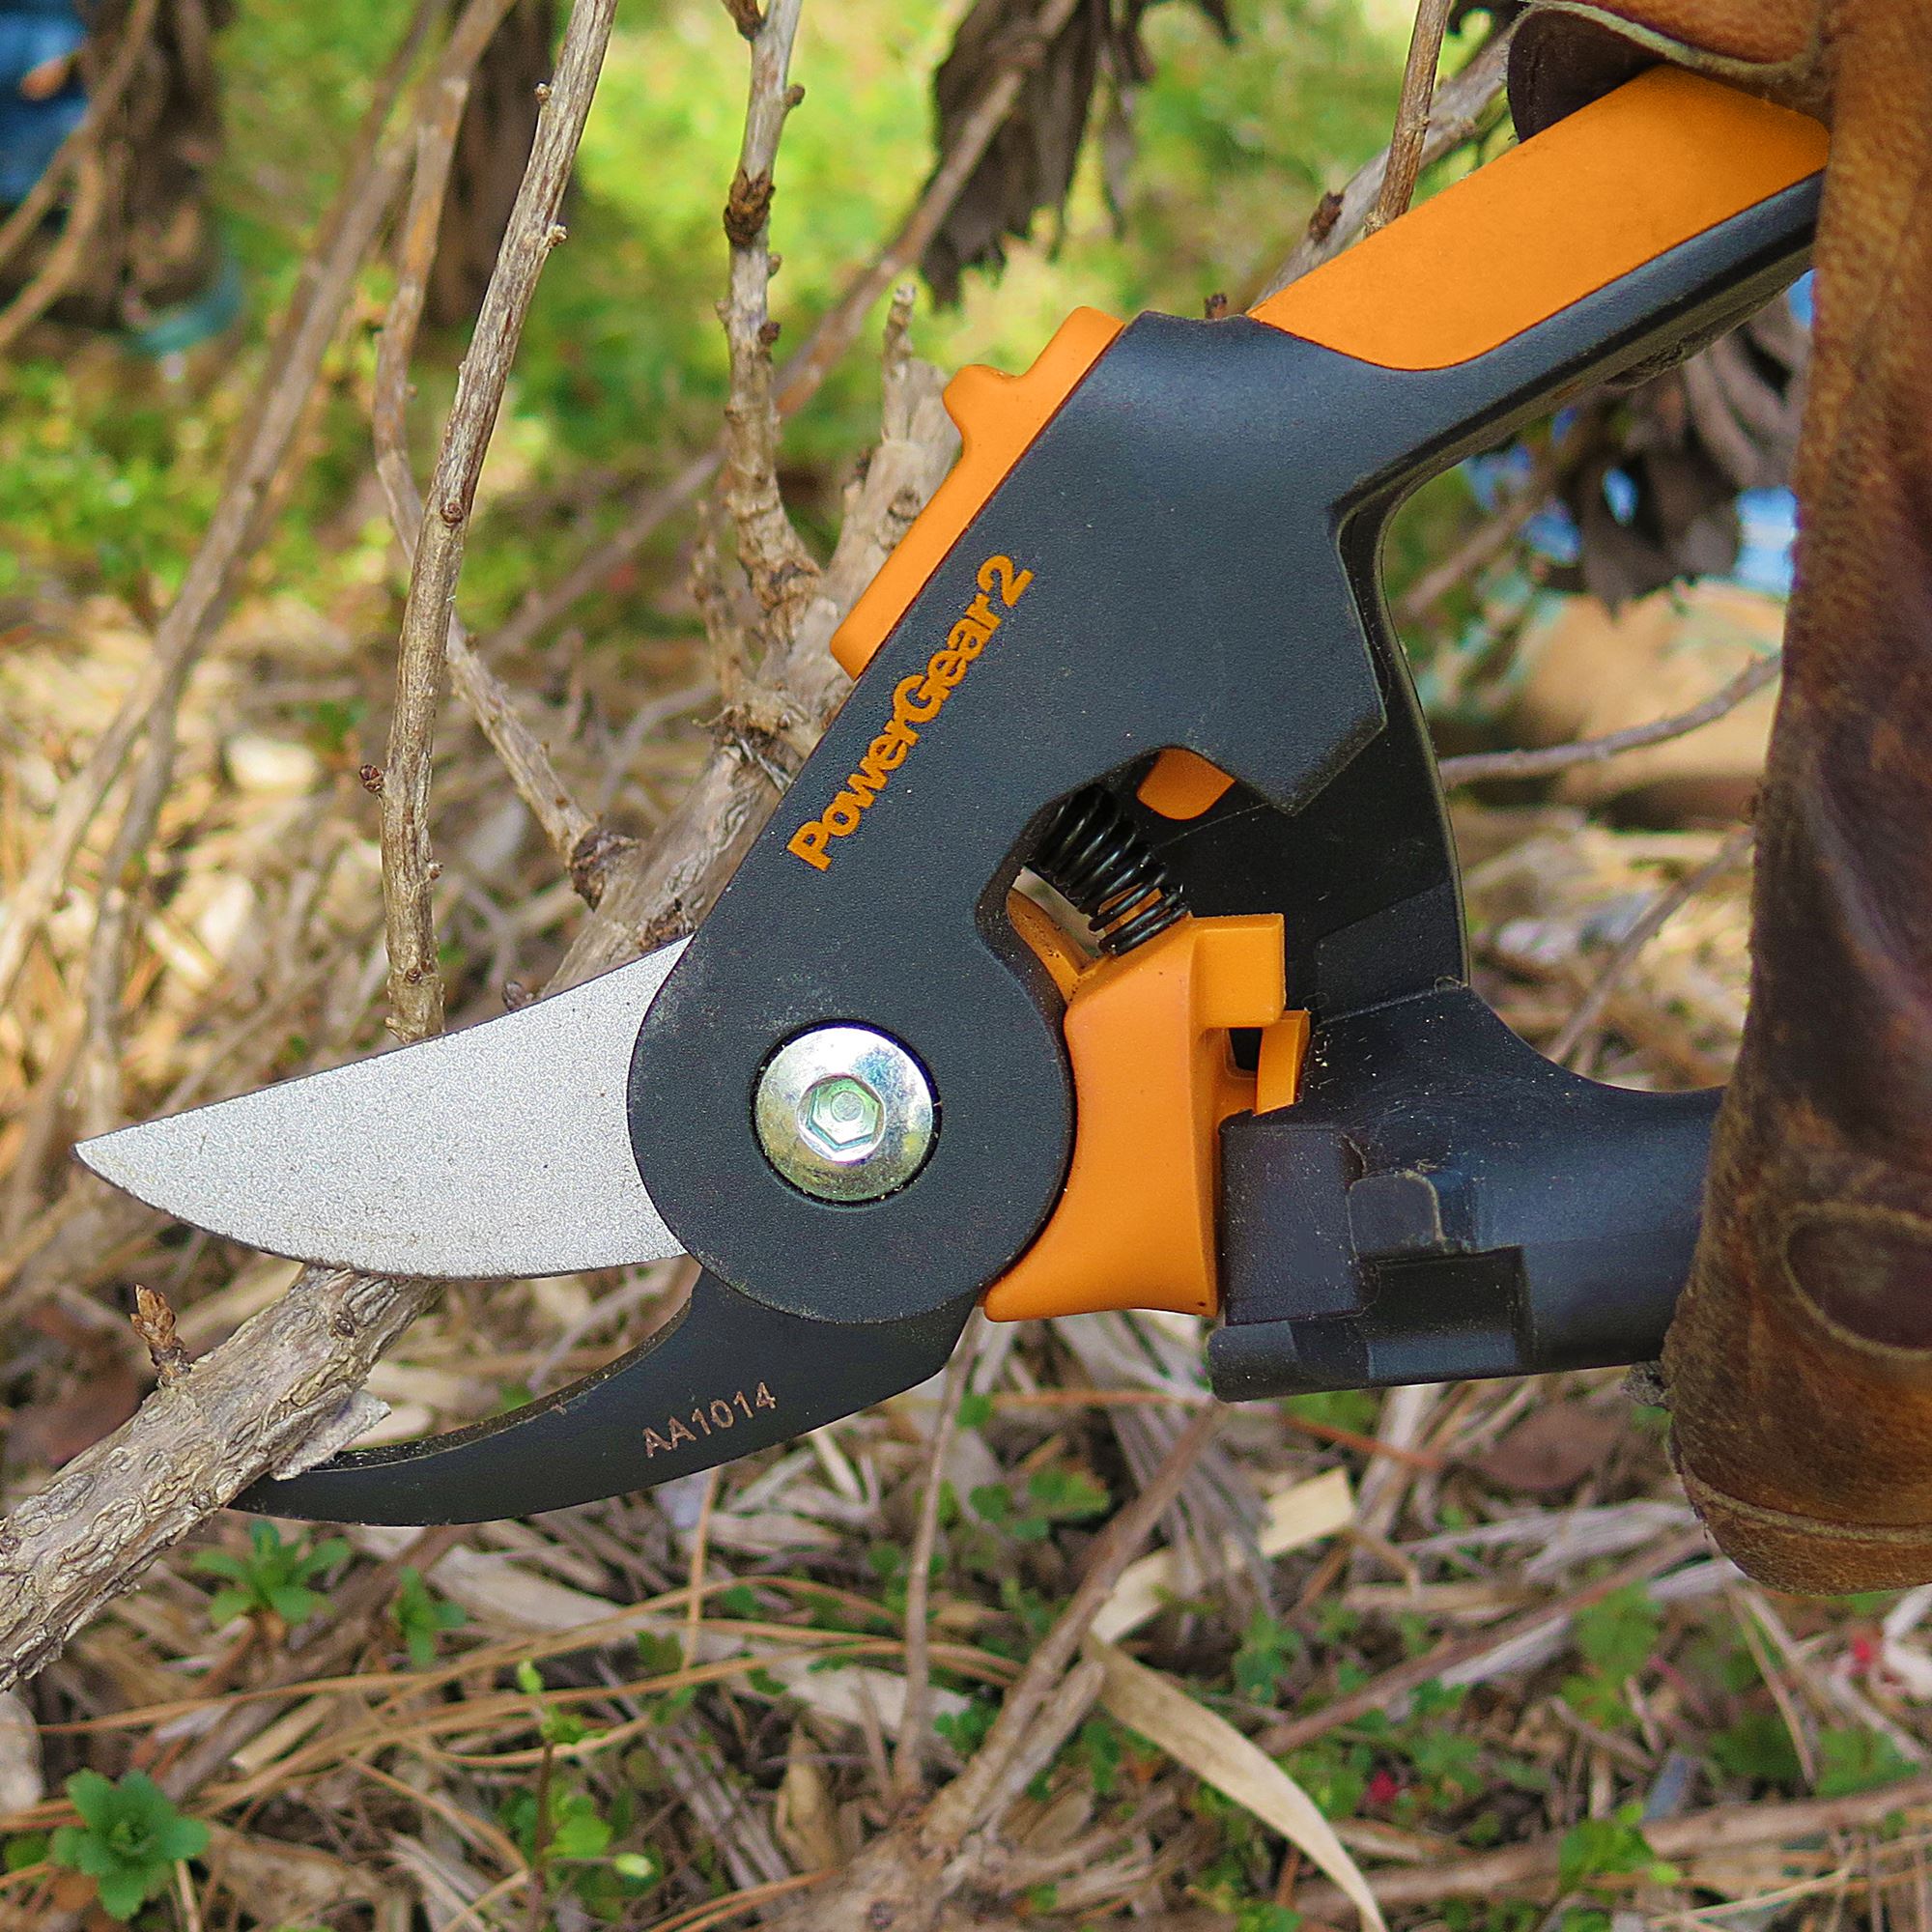 Factors To Consider When Choosing The Best Pruning Shears